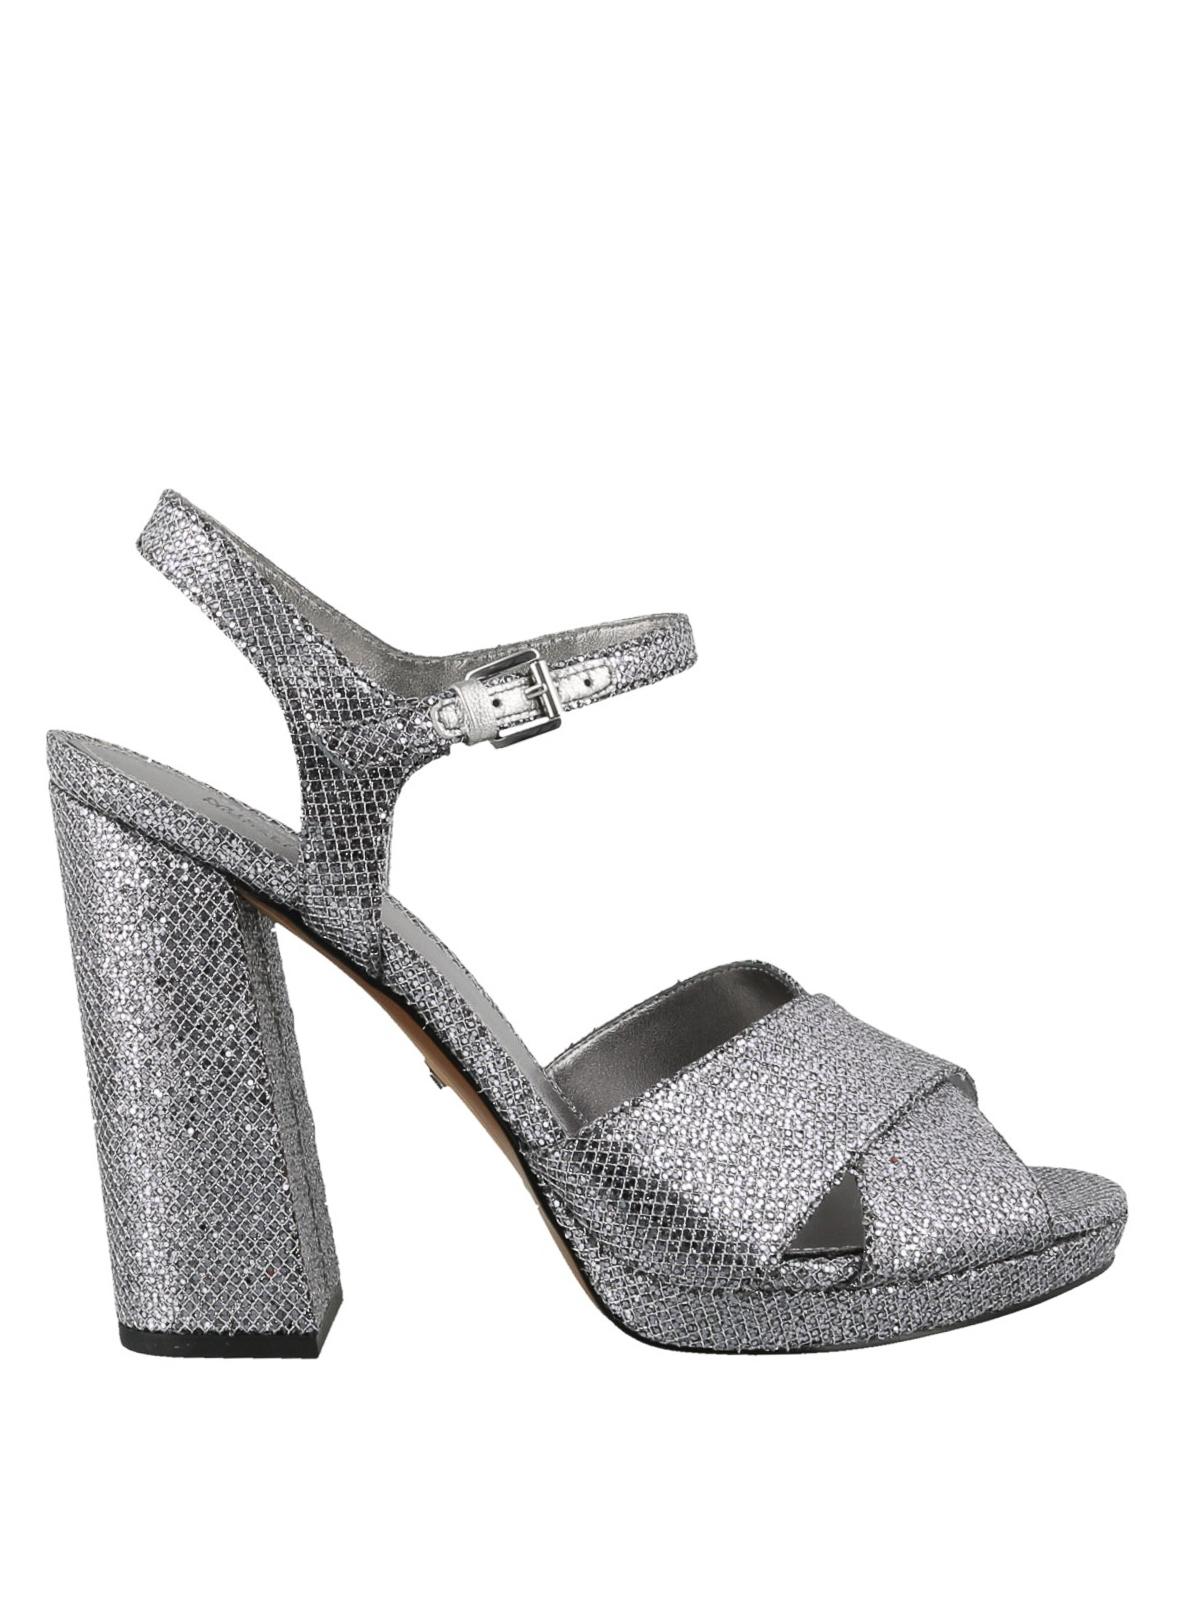 Michael Kors Leather Alexia Glittering Silver Platform Sandals in ...